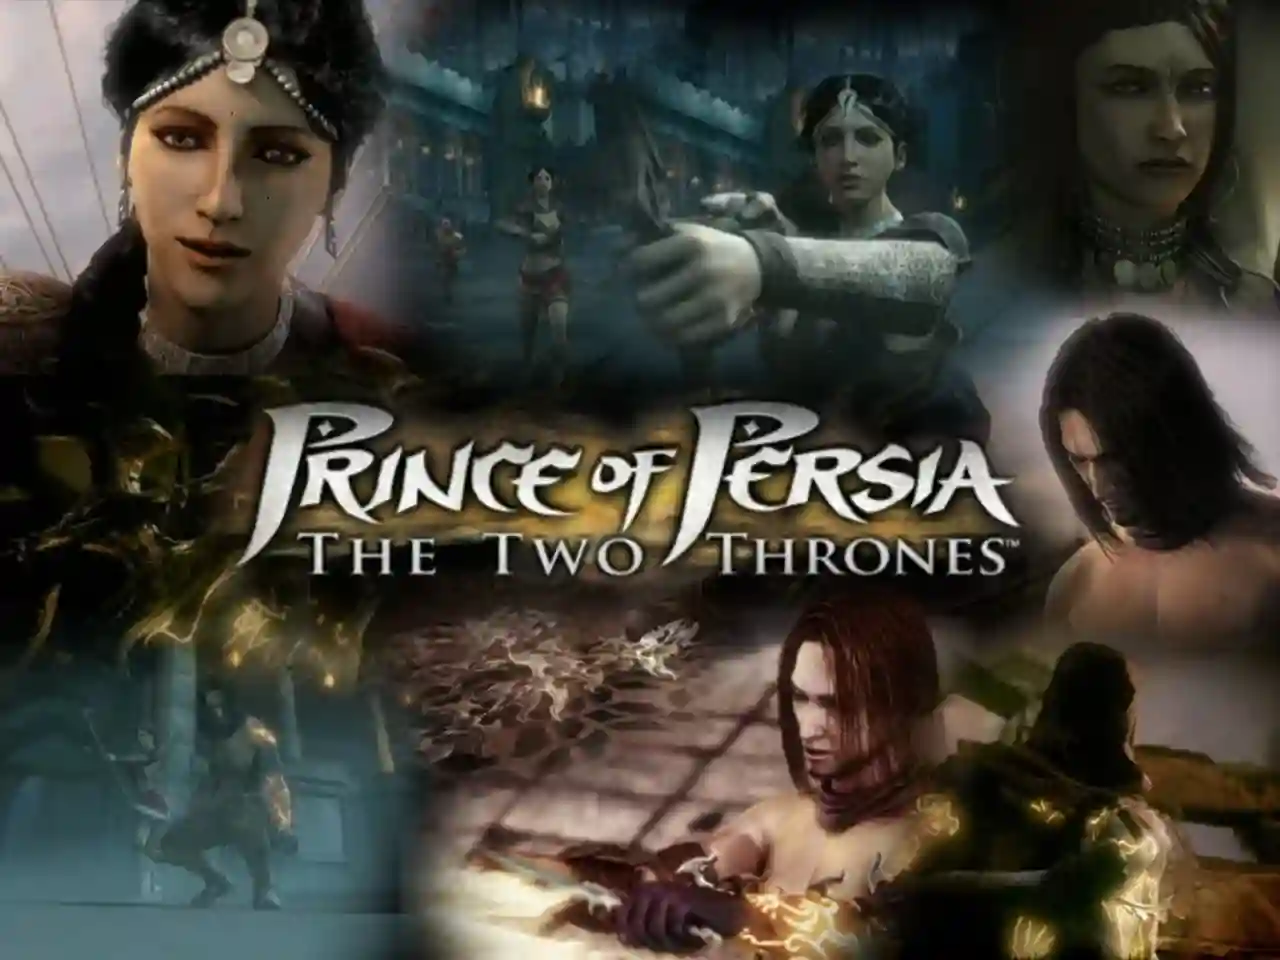 Prince of Persia The Two Thrones 